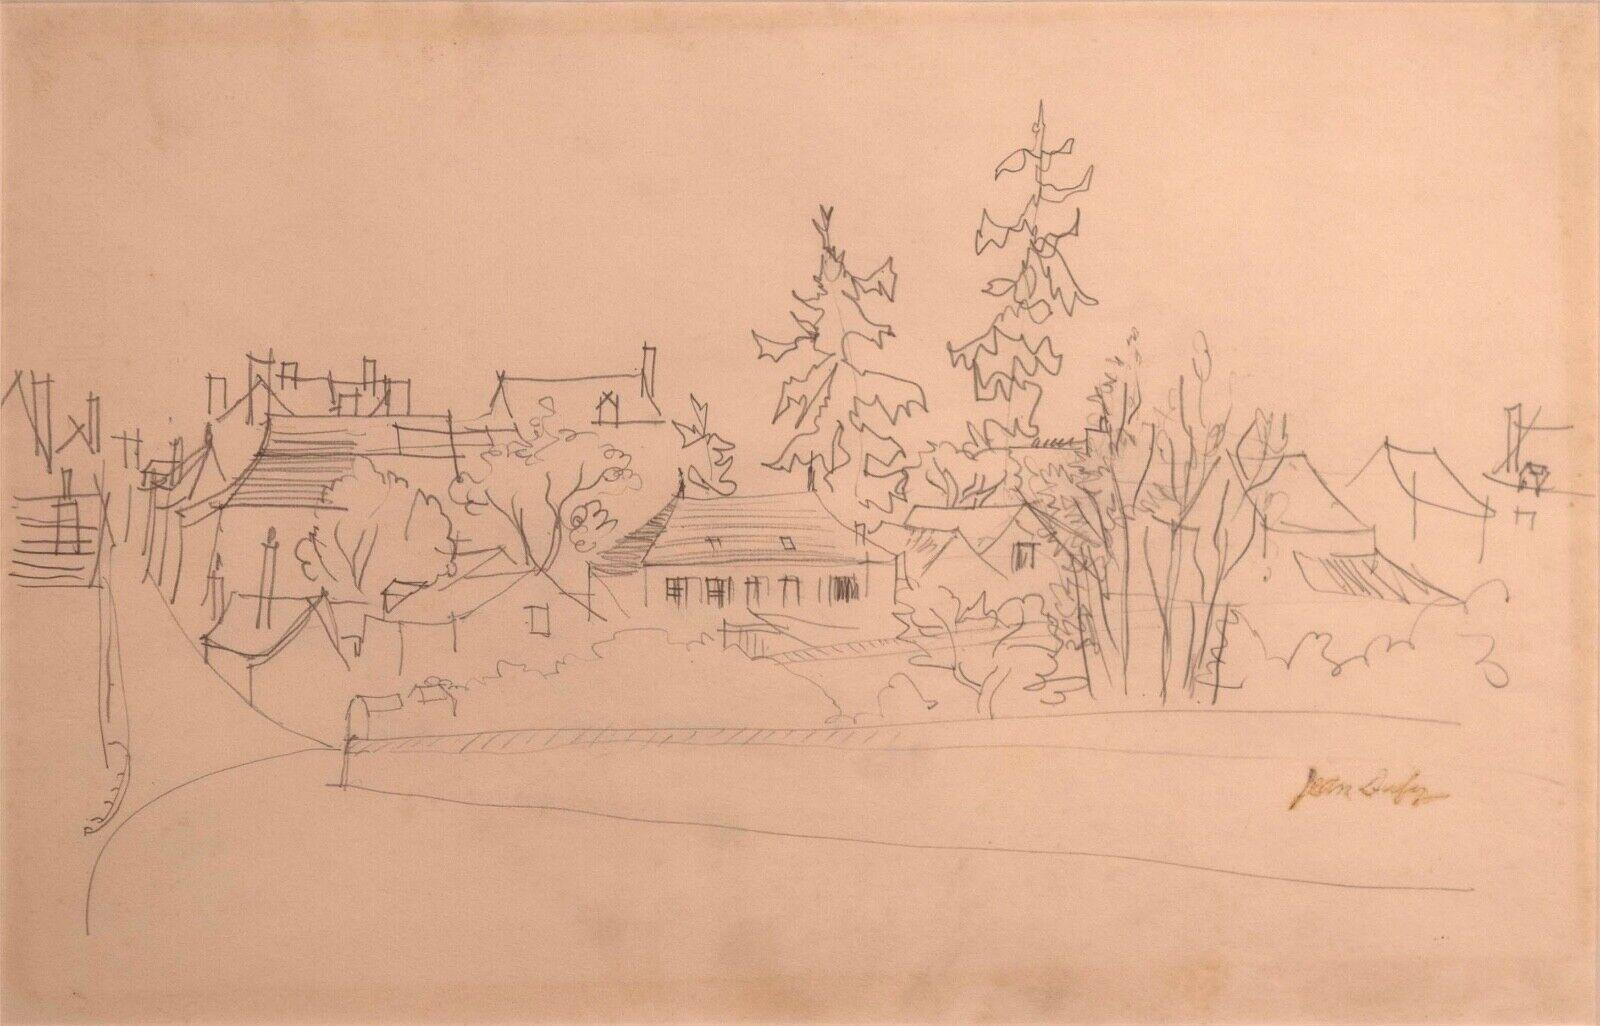 This untitled graphite on paper drawing, signed by Jean Dufy, captures the charming essence of a neighborhood with its fluid, sketch-like lines and loose, expressive style. The composition is delicate and airy, suggesting the lively atmosphere of a